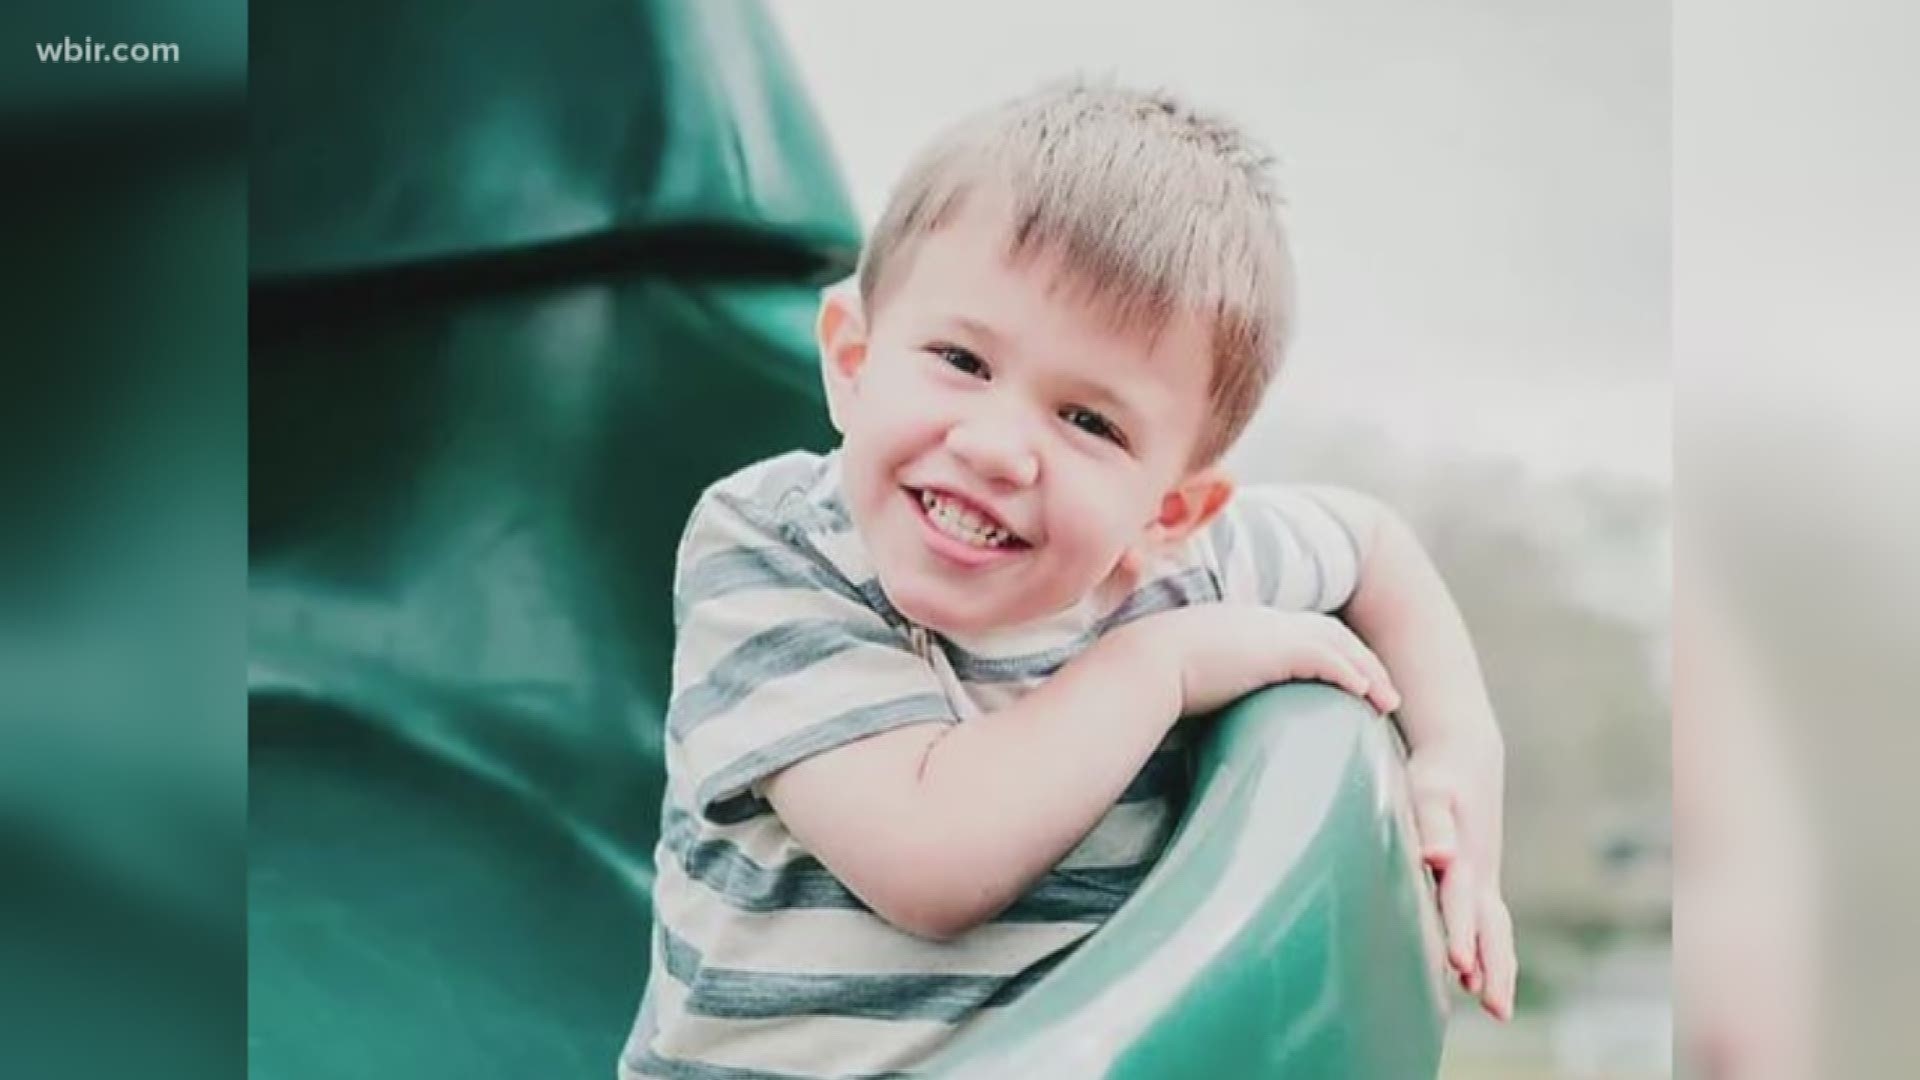 3-year-old Levi slipped away from his family and drowned in the pool just a few weeks. His mother started Water Guardians: Levi's Legacy to help remind other parents about water safety.